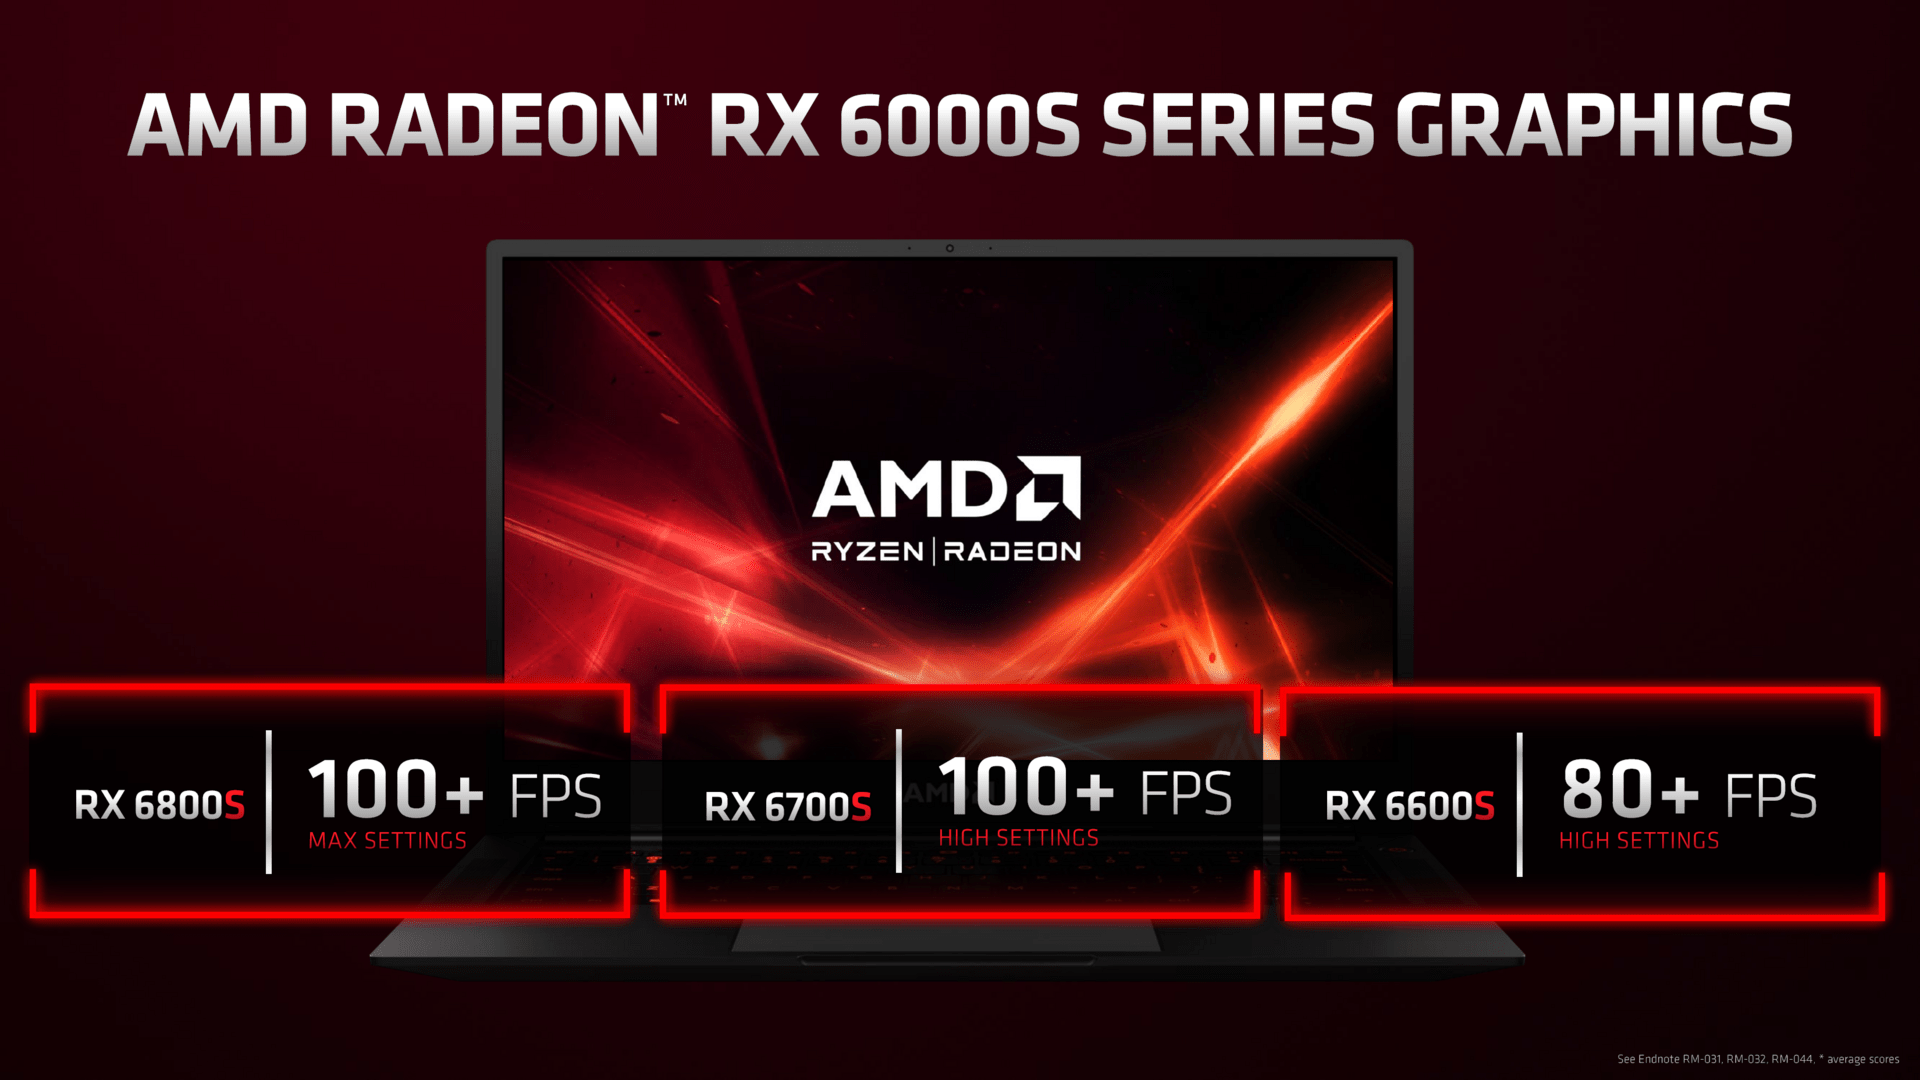 AMD Radeon RX 6000S for thin and light laptops